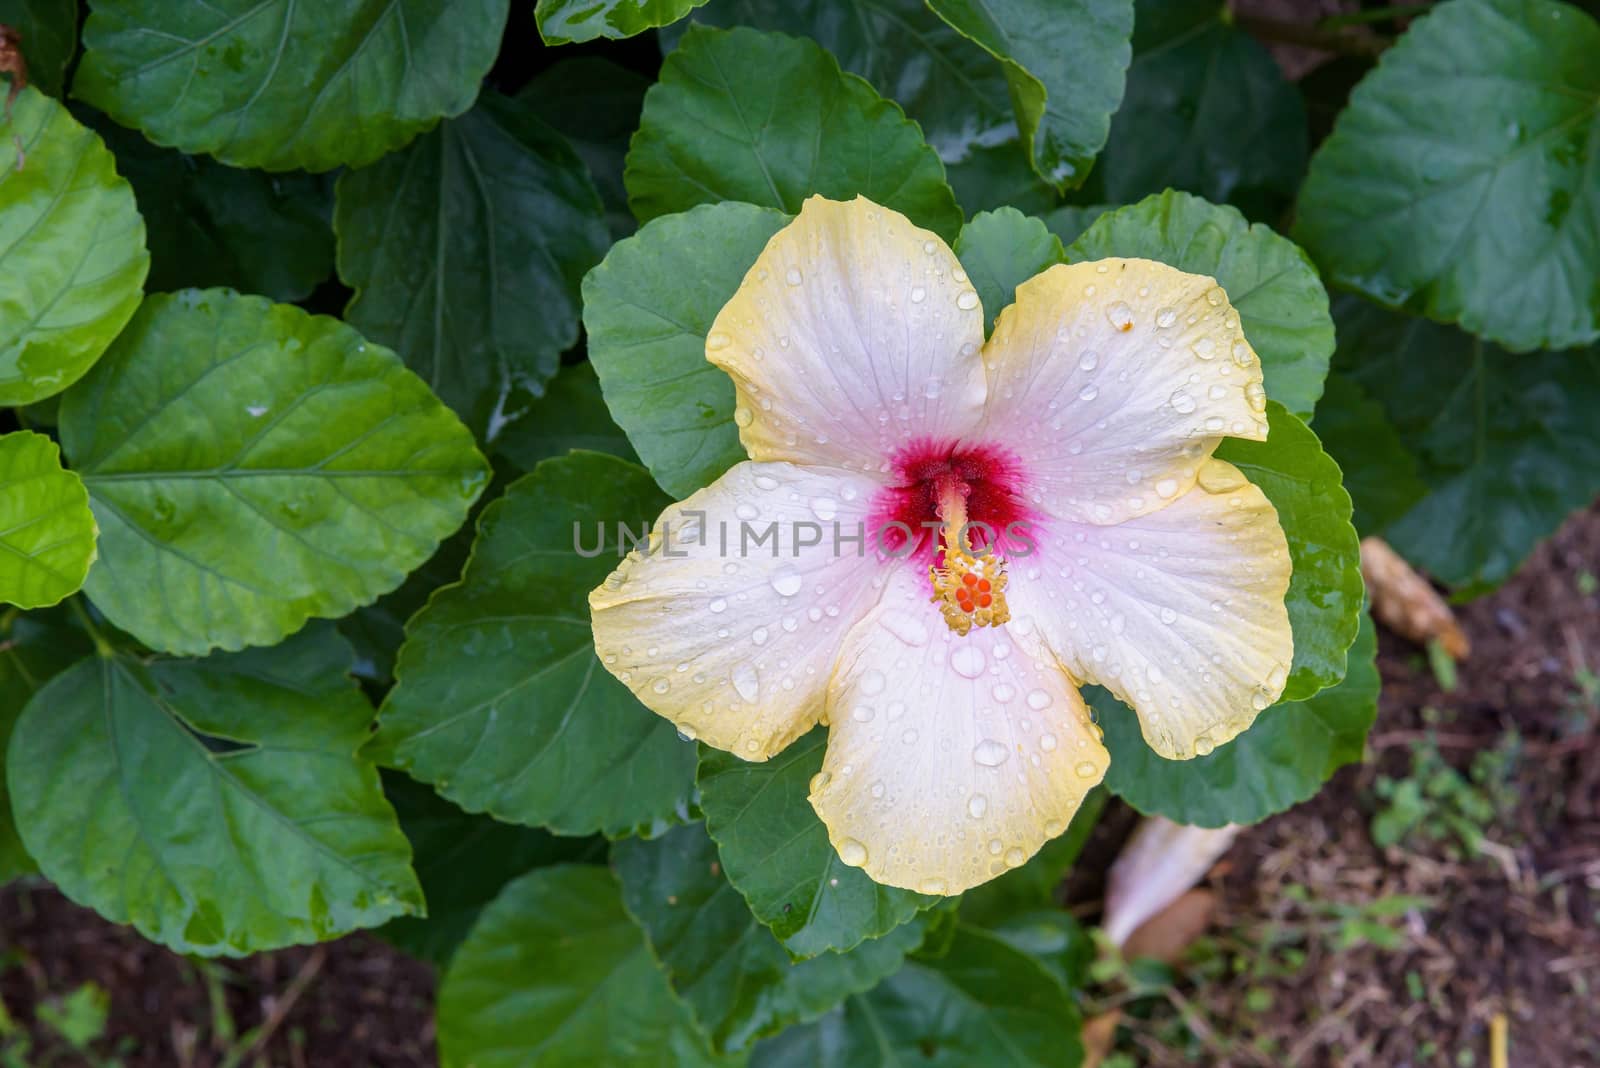 Wet hibiscus flower among green leaves by mkos83